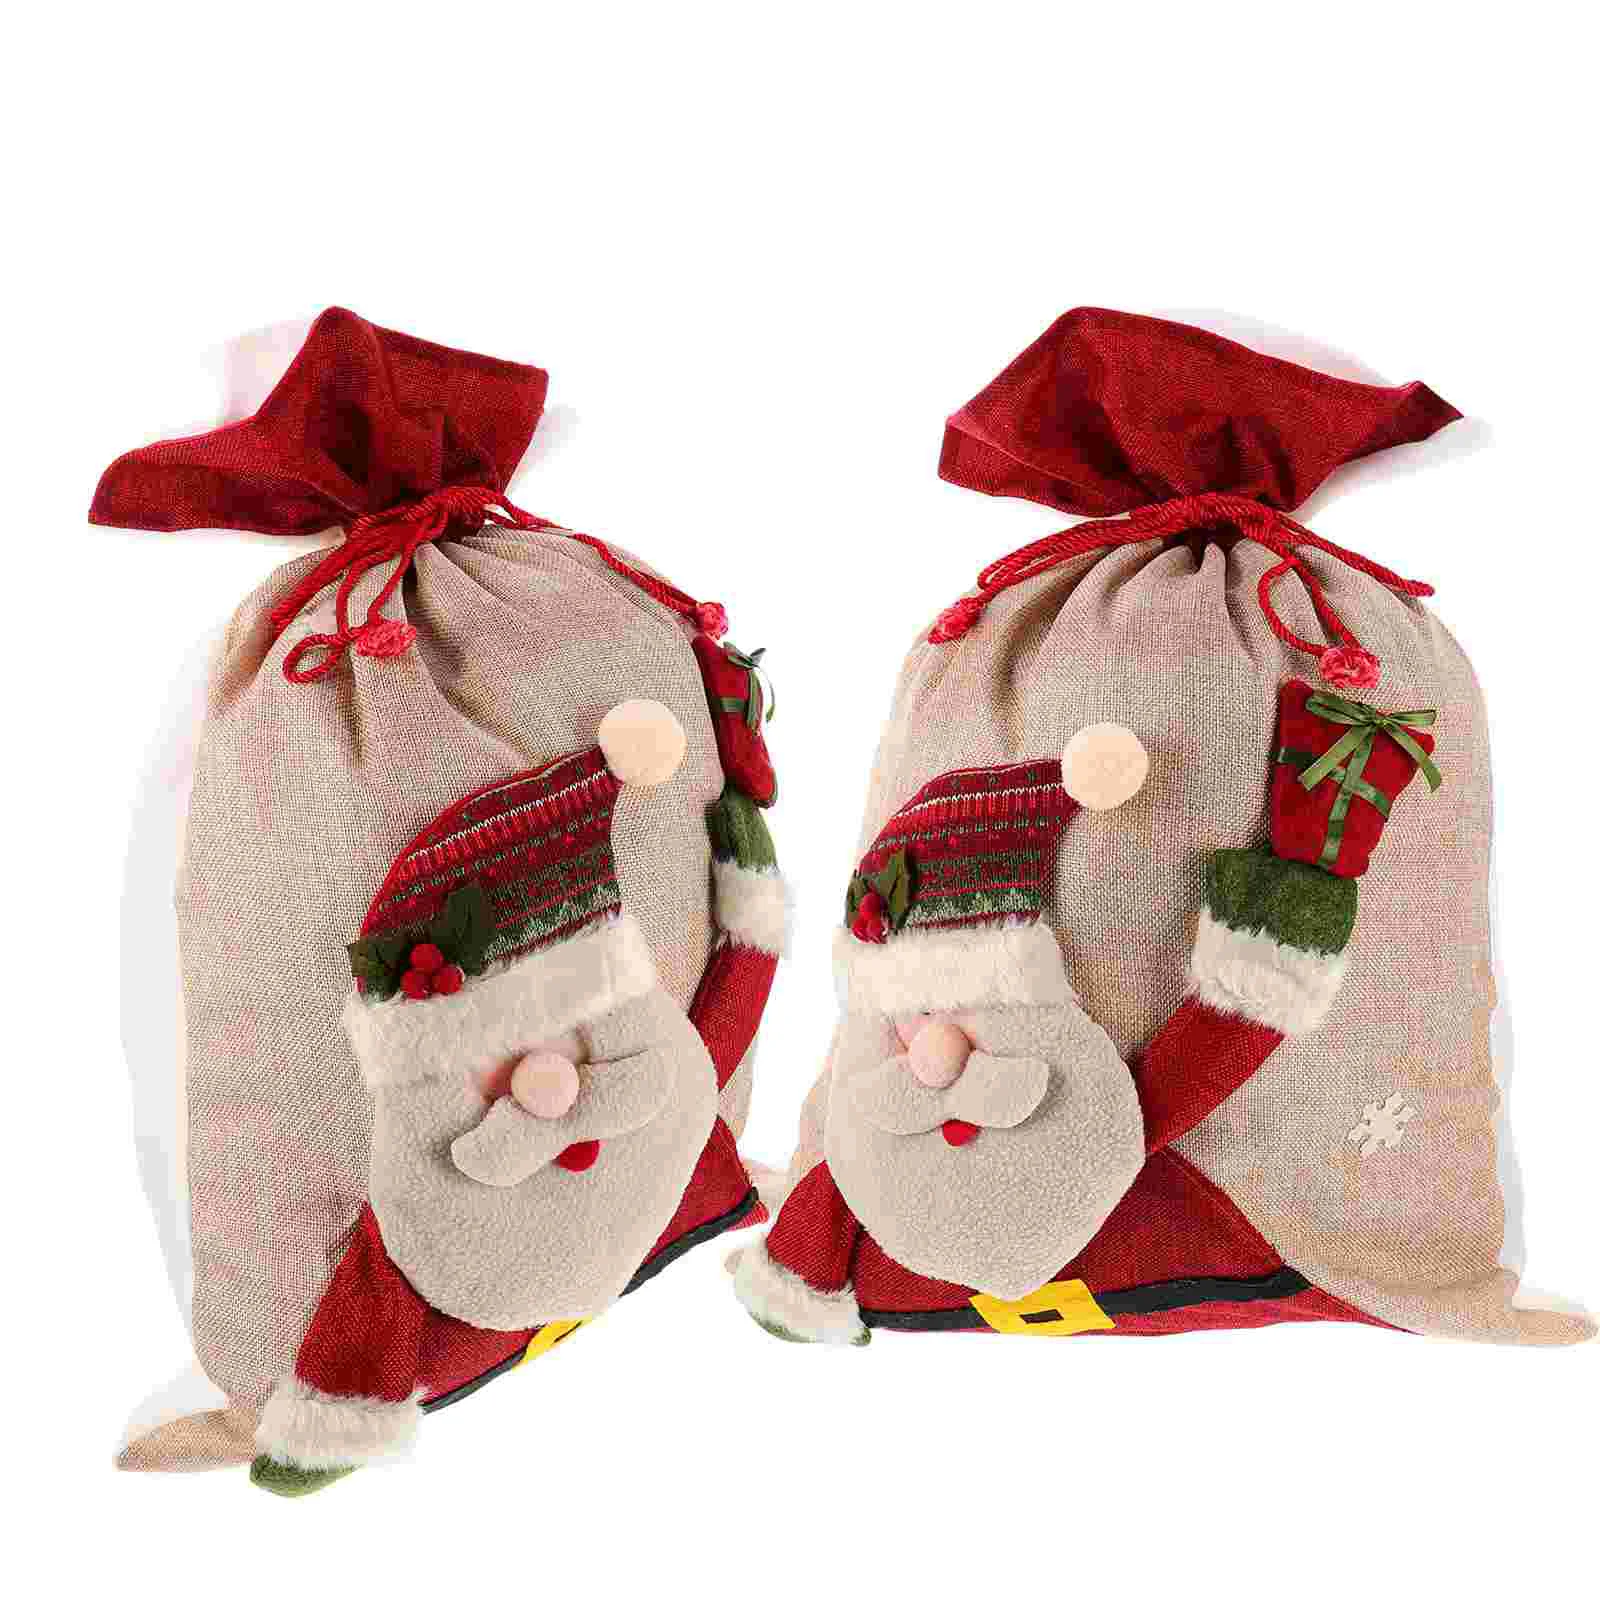 

2 Pcs Christmas Gift Bag Practical Candy Bags Storage Pouches Large Carry Lovely Wrapping Exquisite Novel Packaging